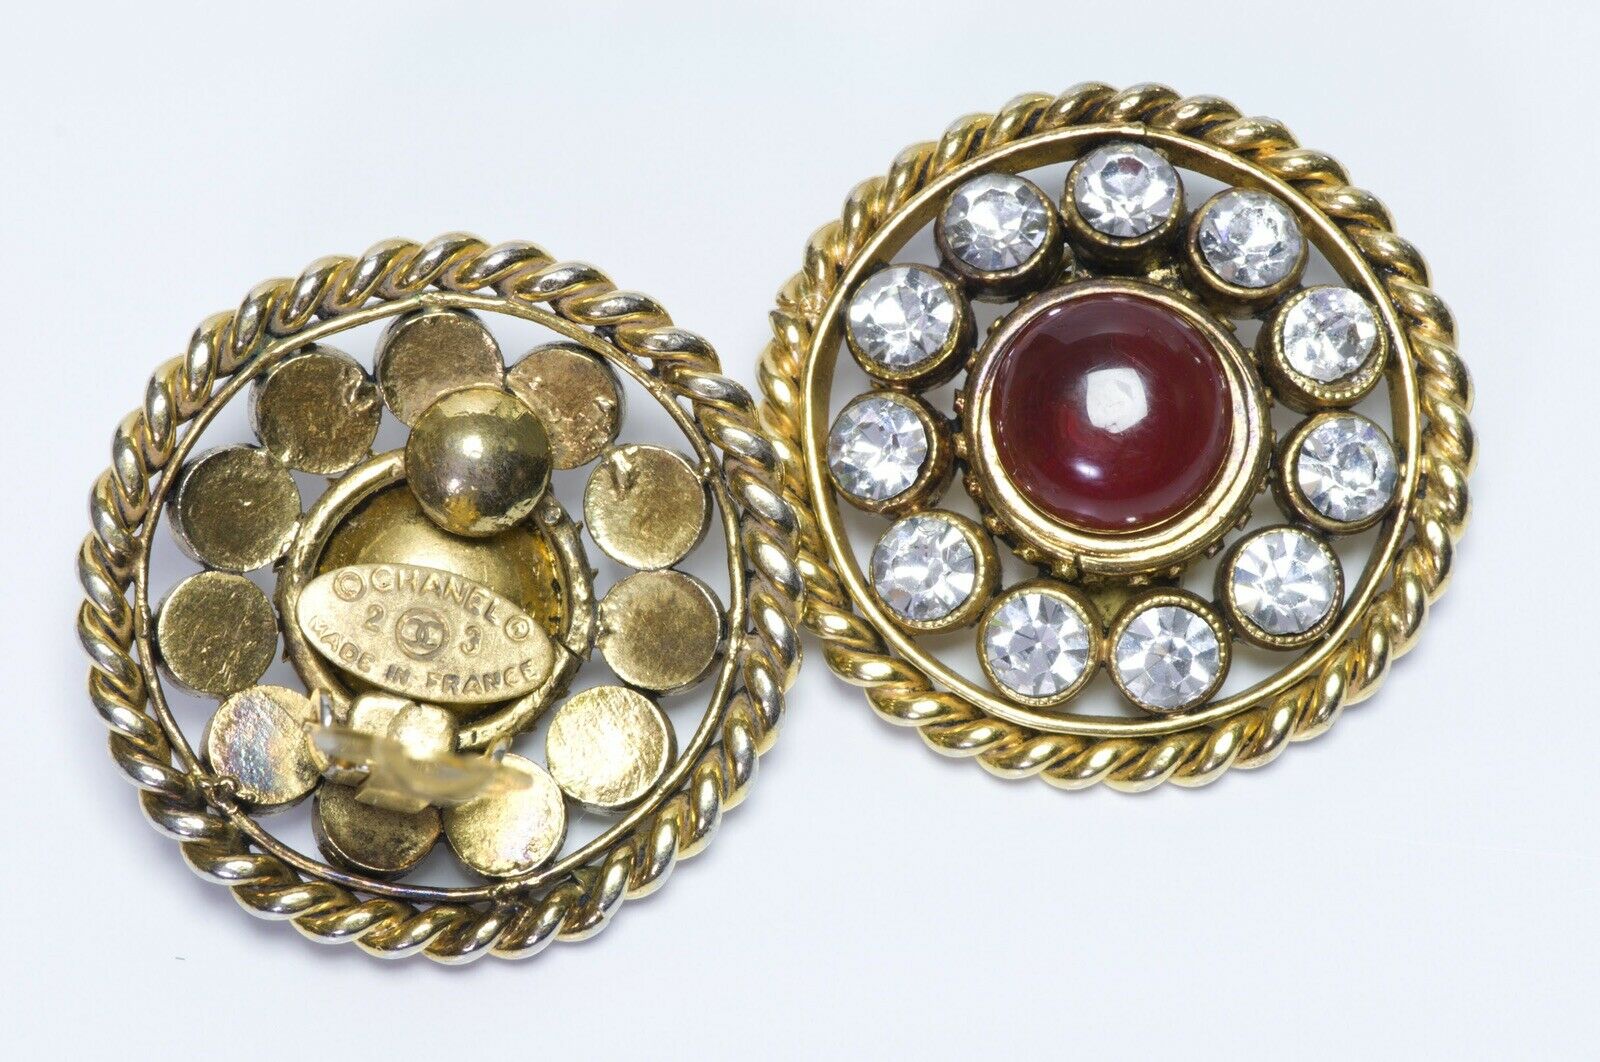 CHANEL Paris Maison Gripoix 1980’s Red Glass Crystal Round Earrings